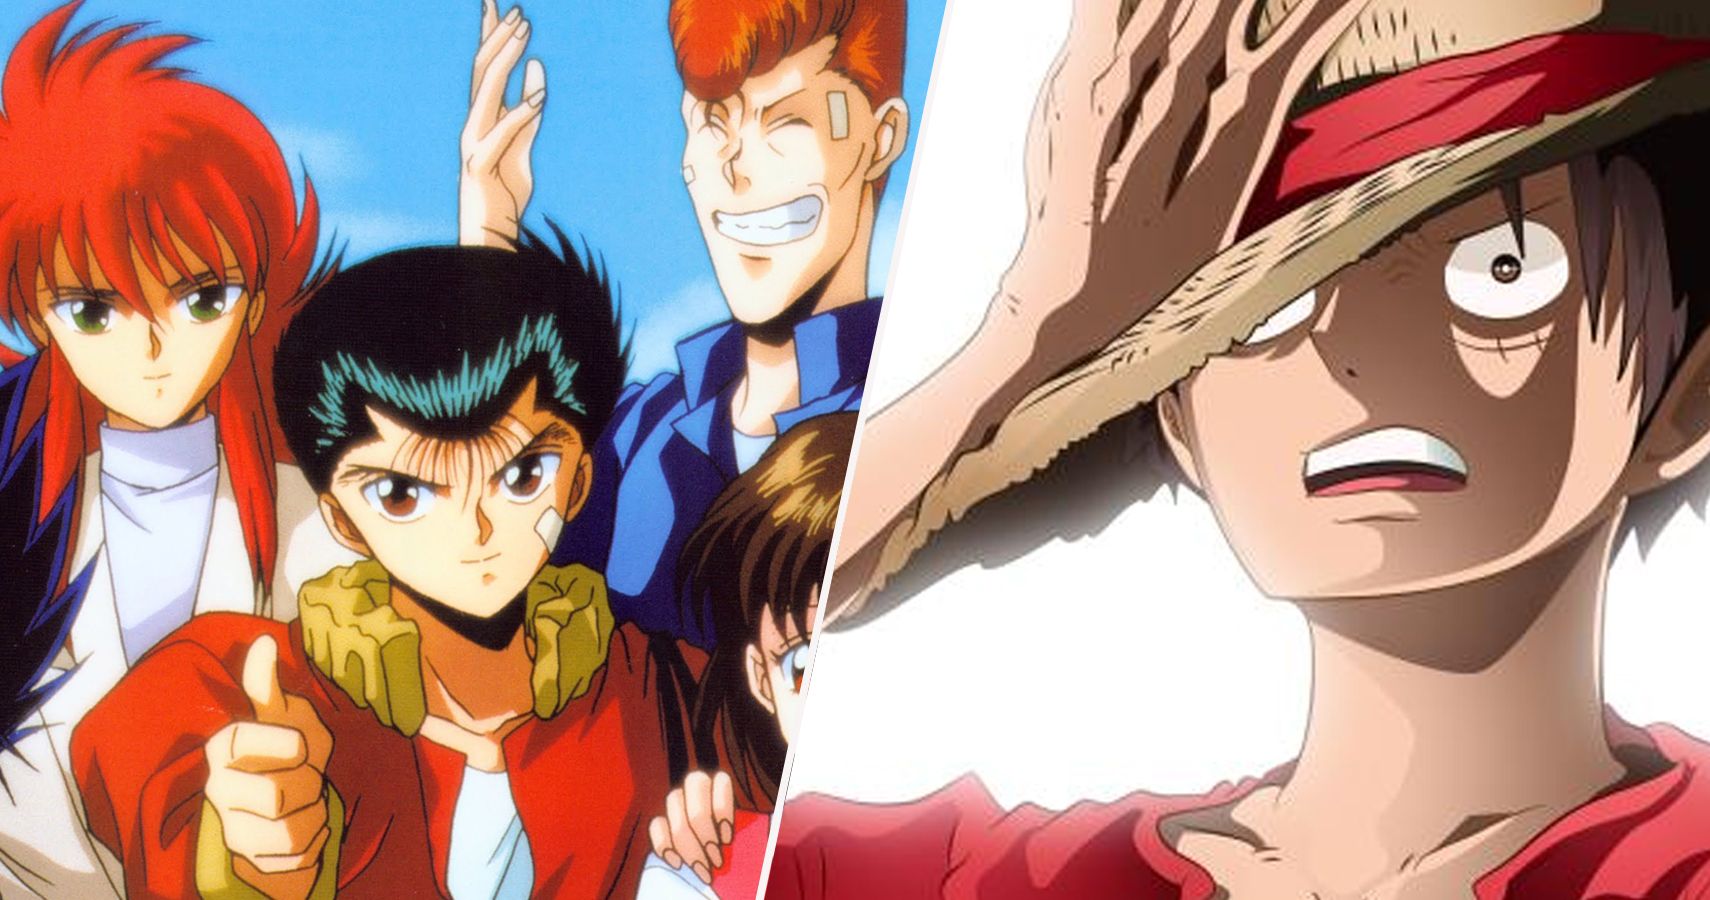 20 Anime Series Netflix Should Reboot (5 They Shouldnt Touch)